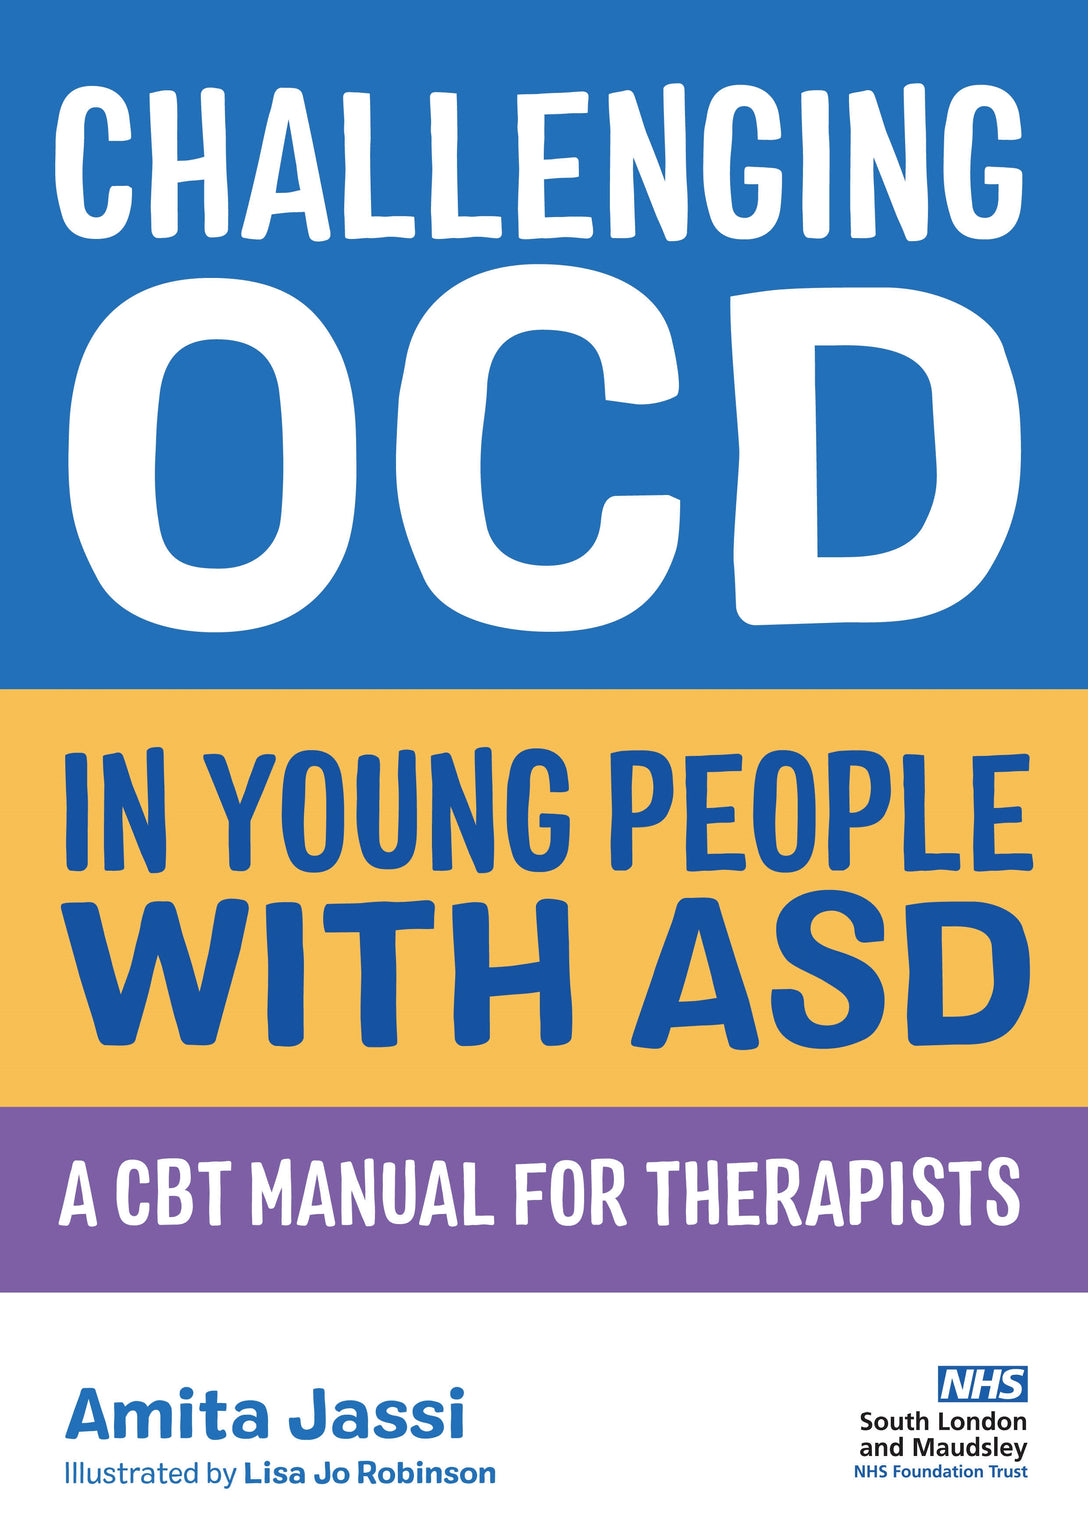 Challenging OCD in Young People with ASD by Lisa Jo Robinson, Amita Jassi